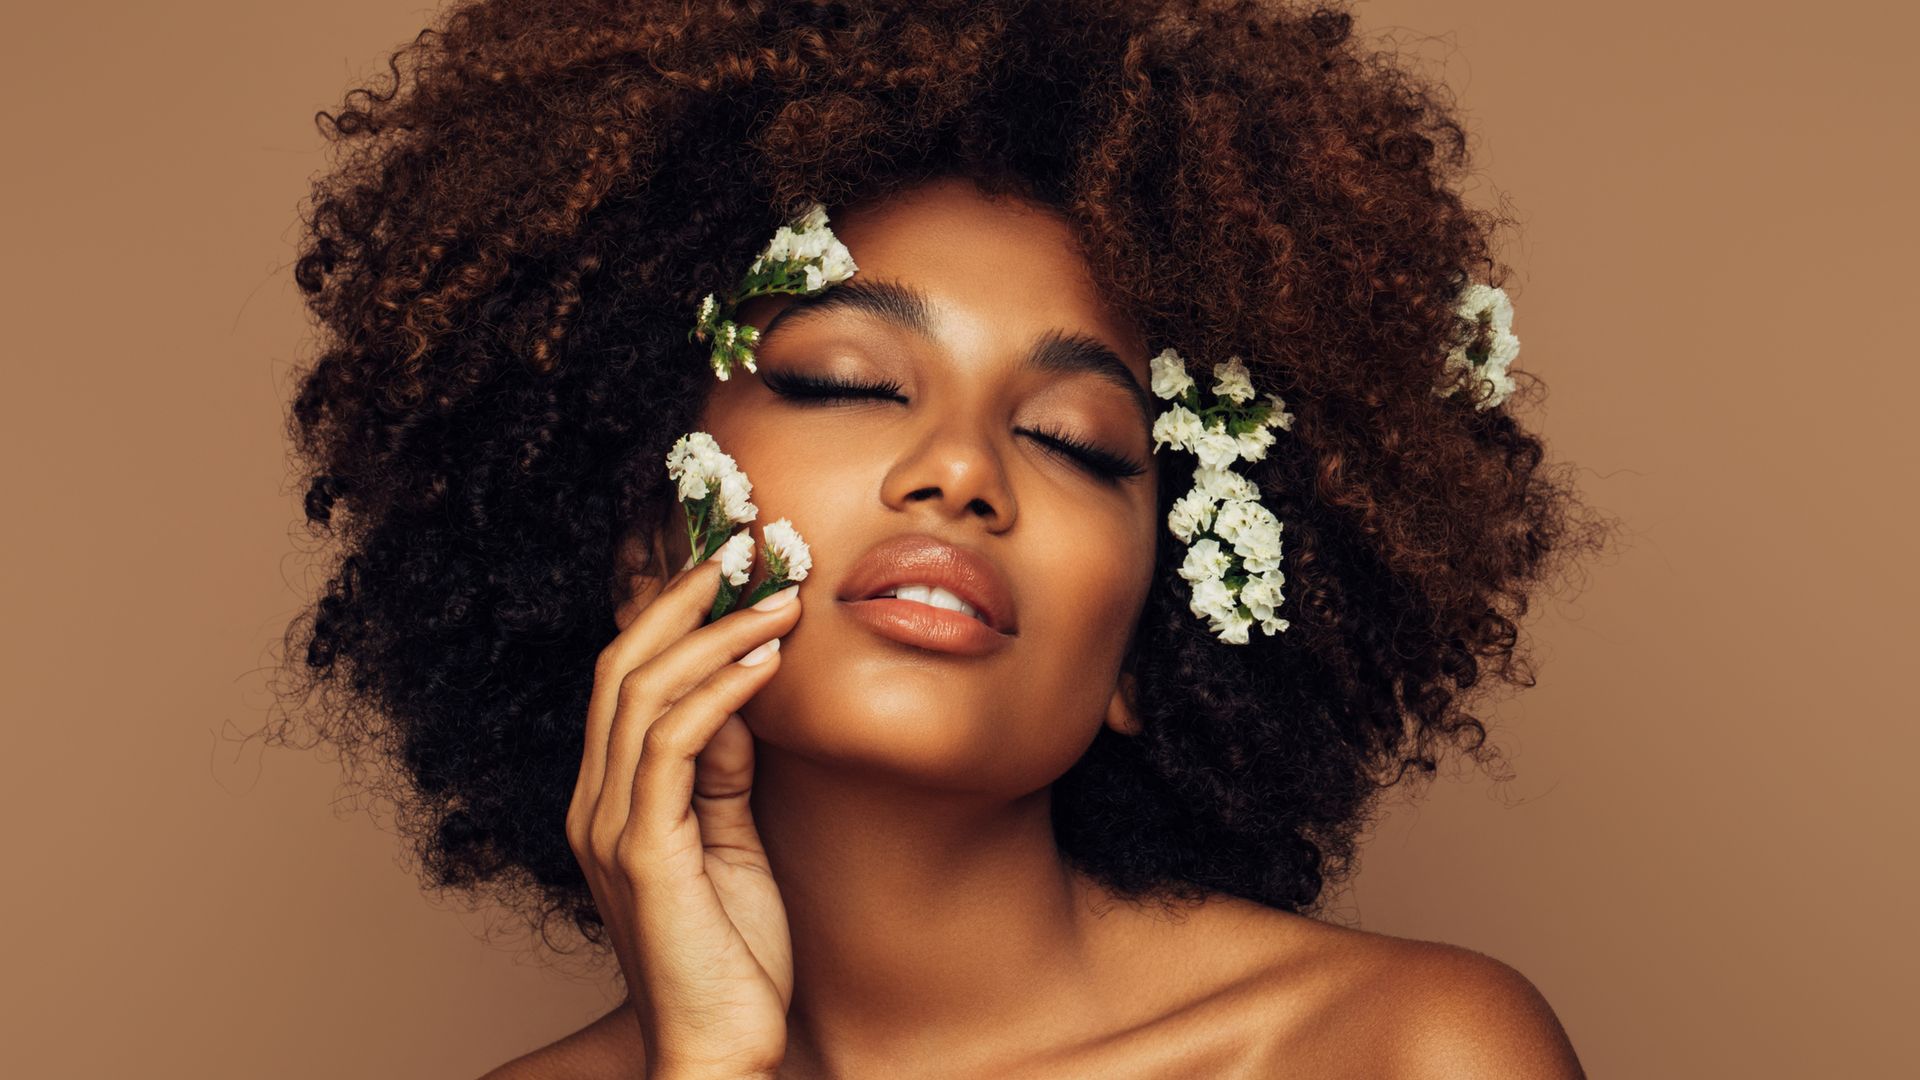 How to get your skin ready for spring according to a pro facialist